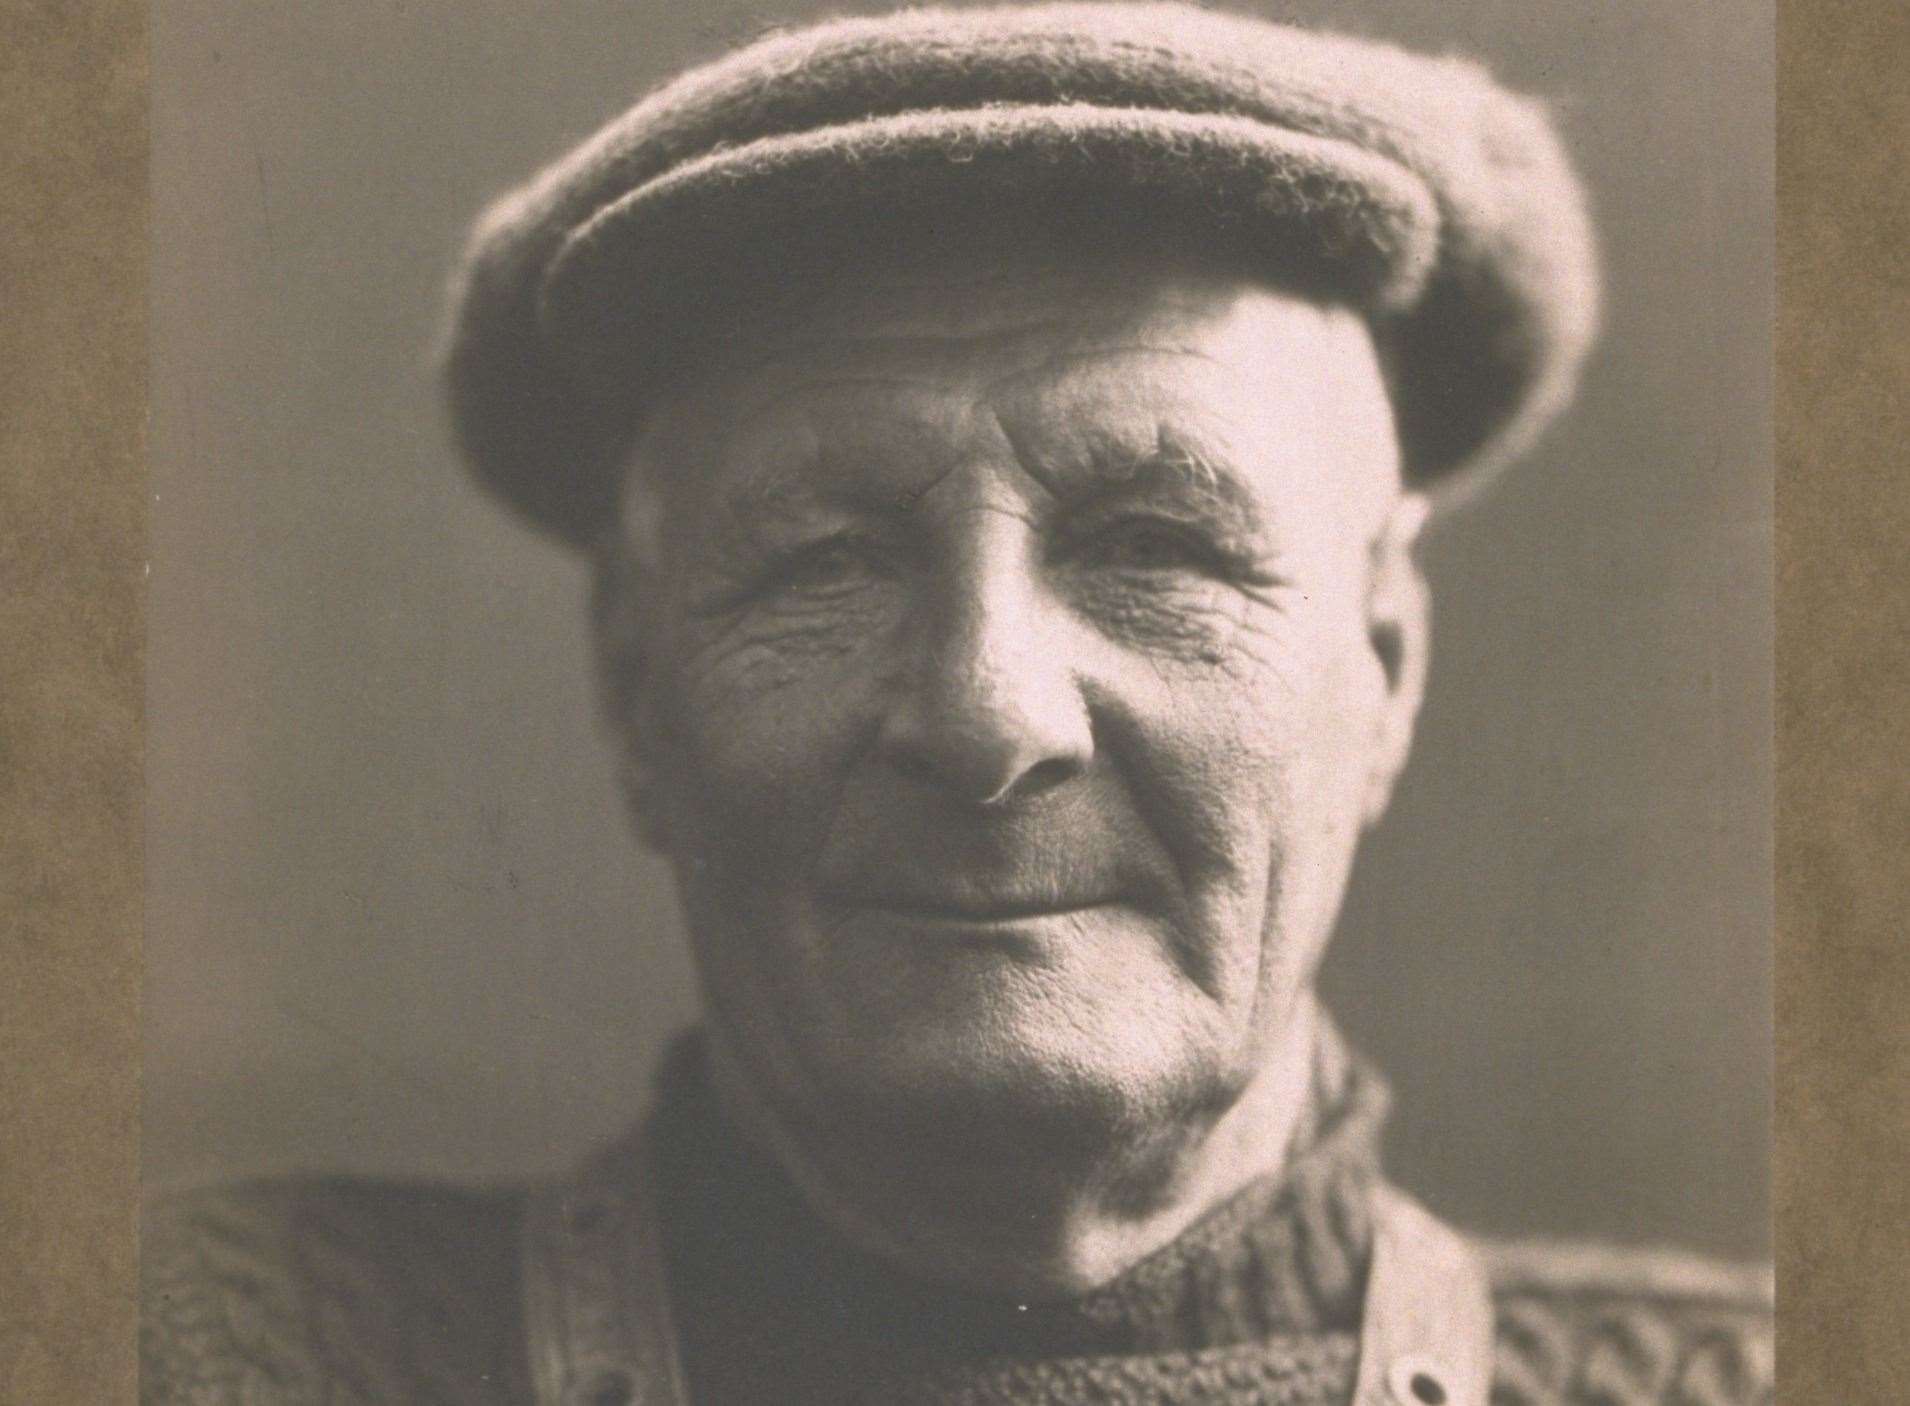 The RNLI’s most decorated crew member Henry Blogg, coxswain of Cromer lifeboat, in his jersey, cap and Kapok lifejacket in 1942. Image: RNLI.